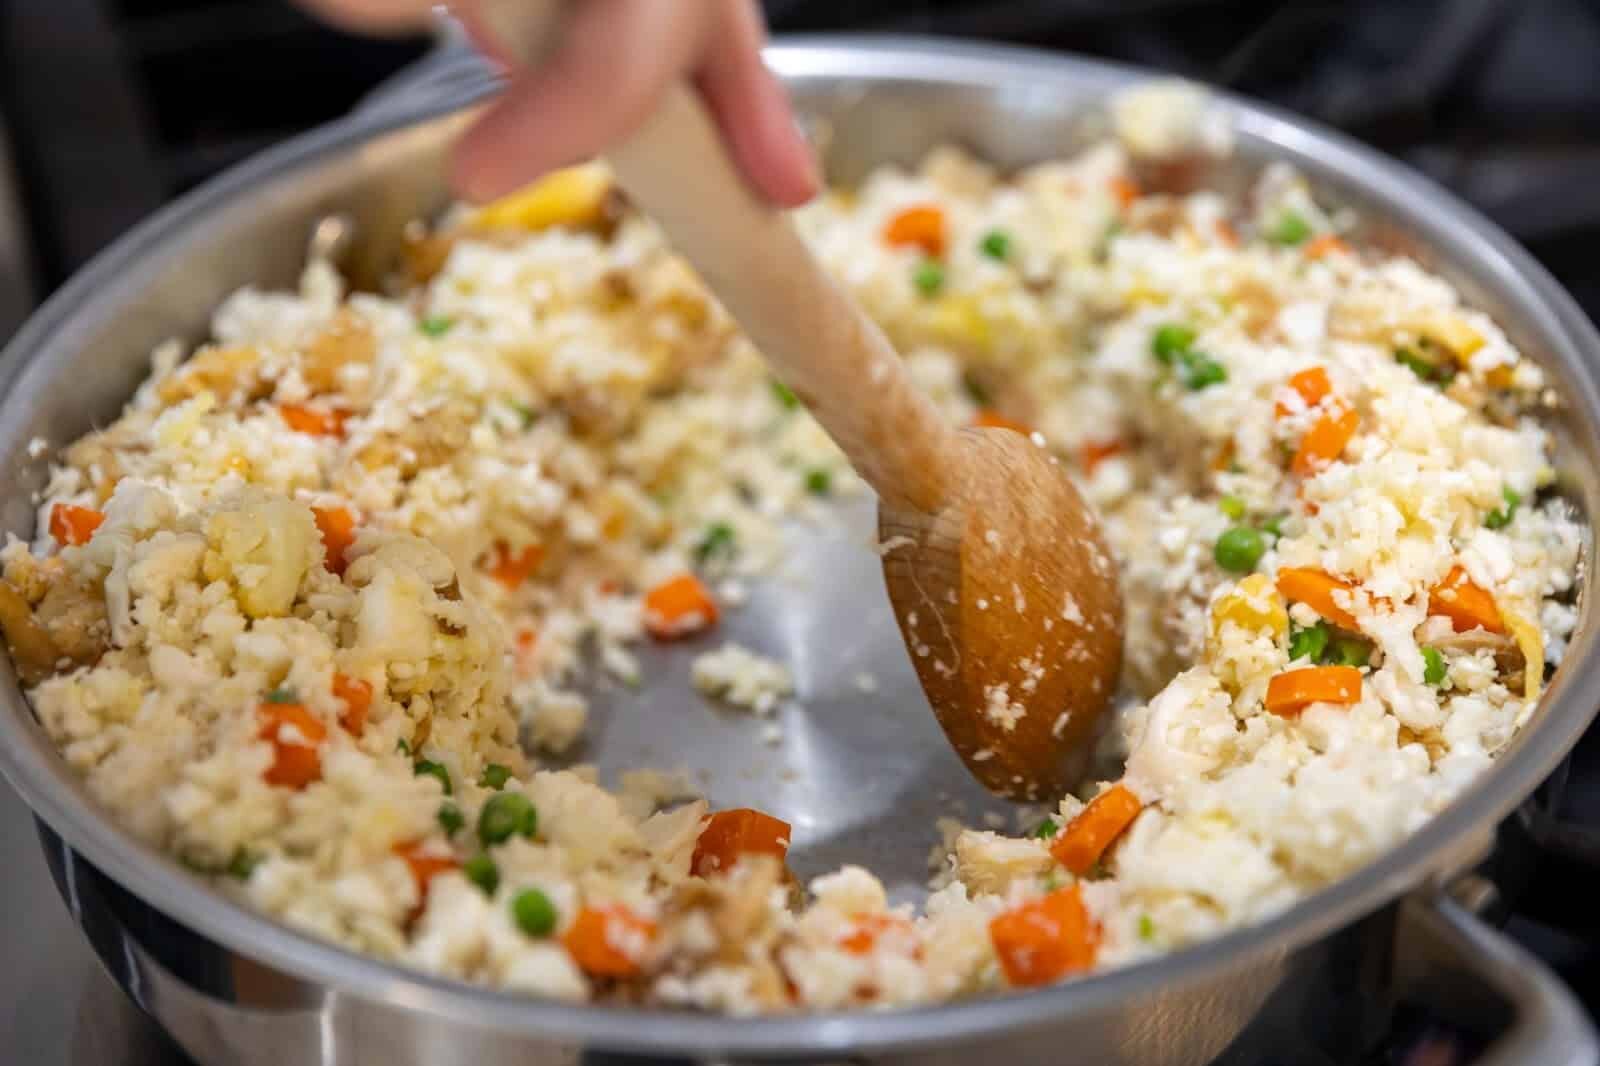 A wooden spoon stirs vegan cauliflower fried rice made with homemade cauliflower rice, carrots, peas, ginger, garlic, and egg substitute.